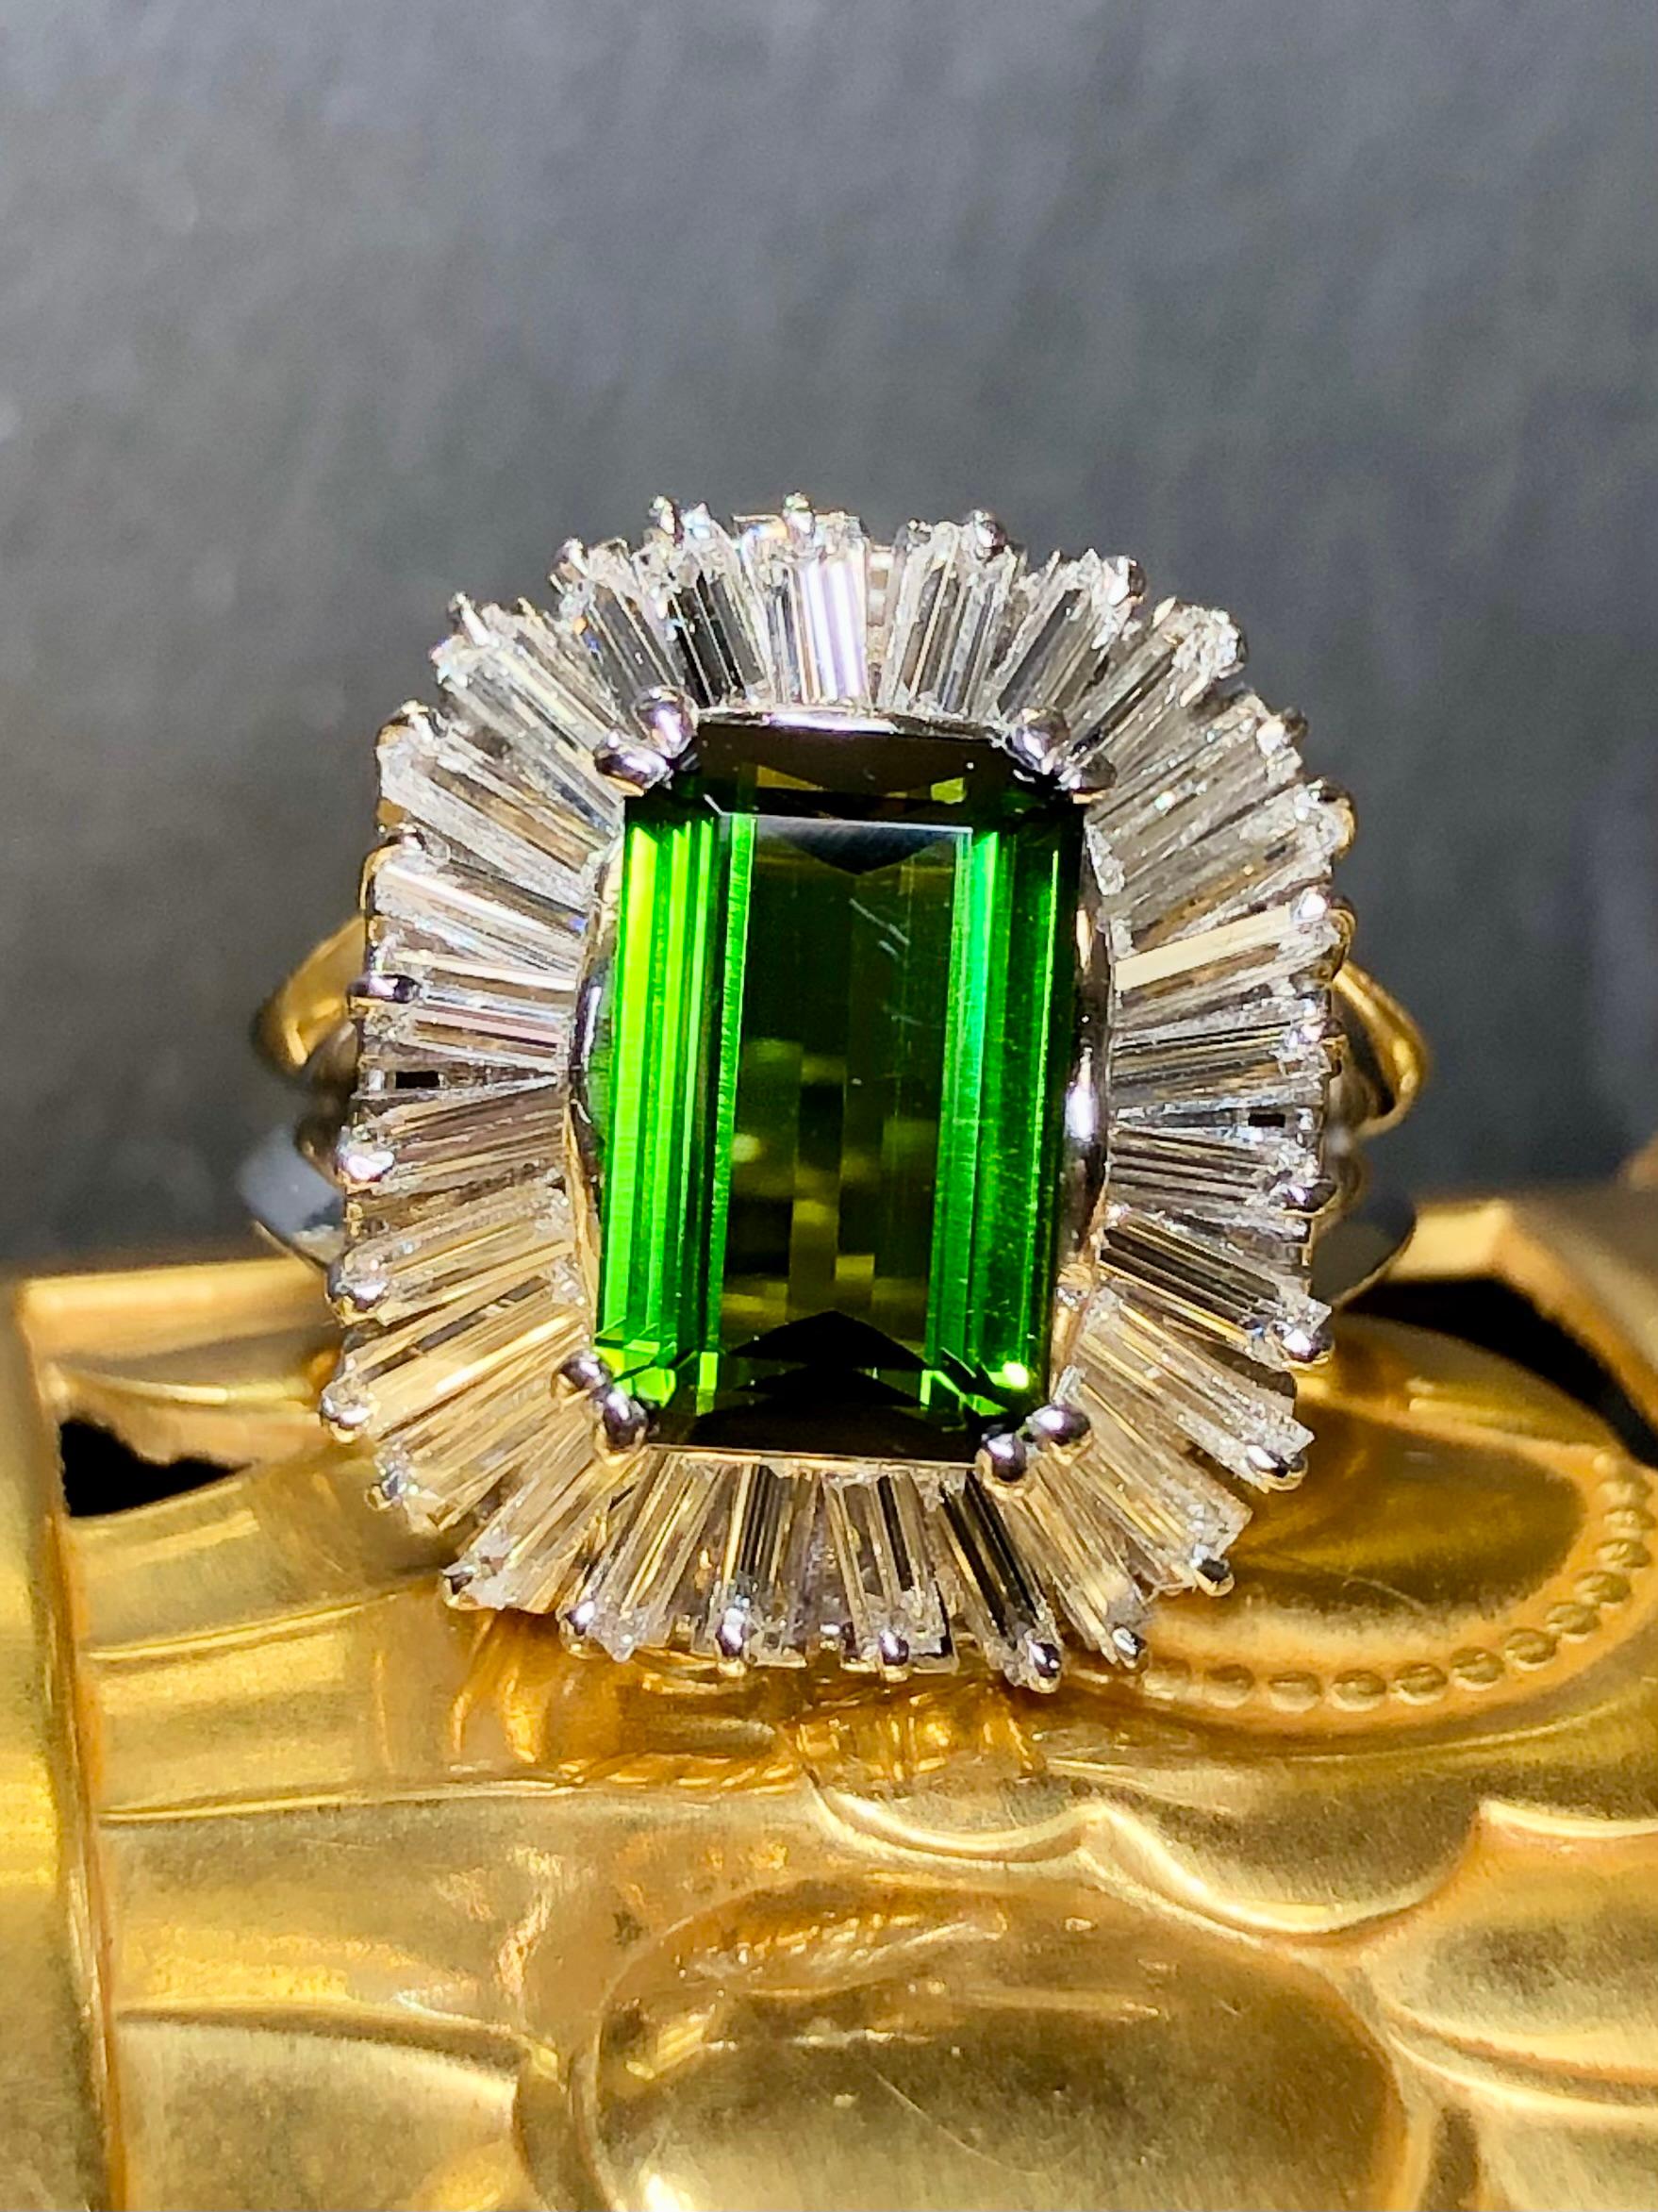 An exquisite ballerina style cocktail ring c. the 1960’s from the house of BOUCHERON. It is done in platinum and centered by an approximately 3ct deep green natural tourmaline surrounded by approximately 2.70cttw in F-G Vs1 clarity baguette